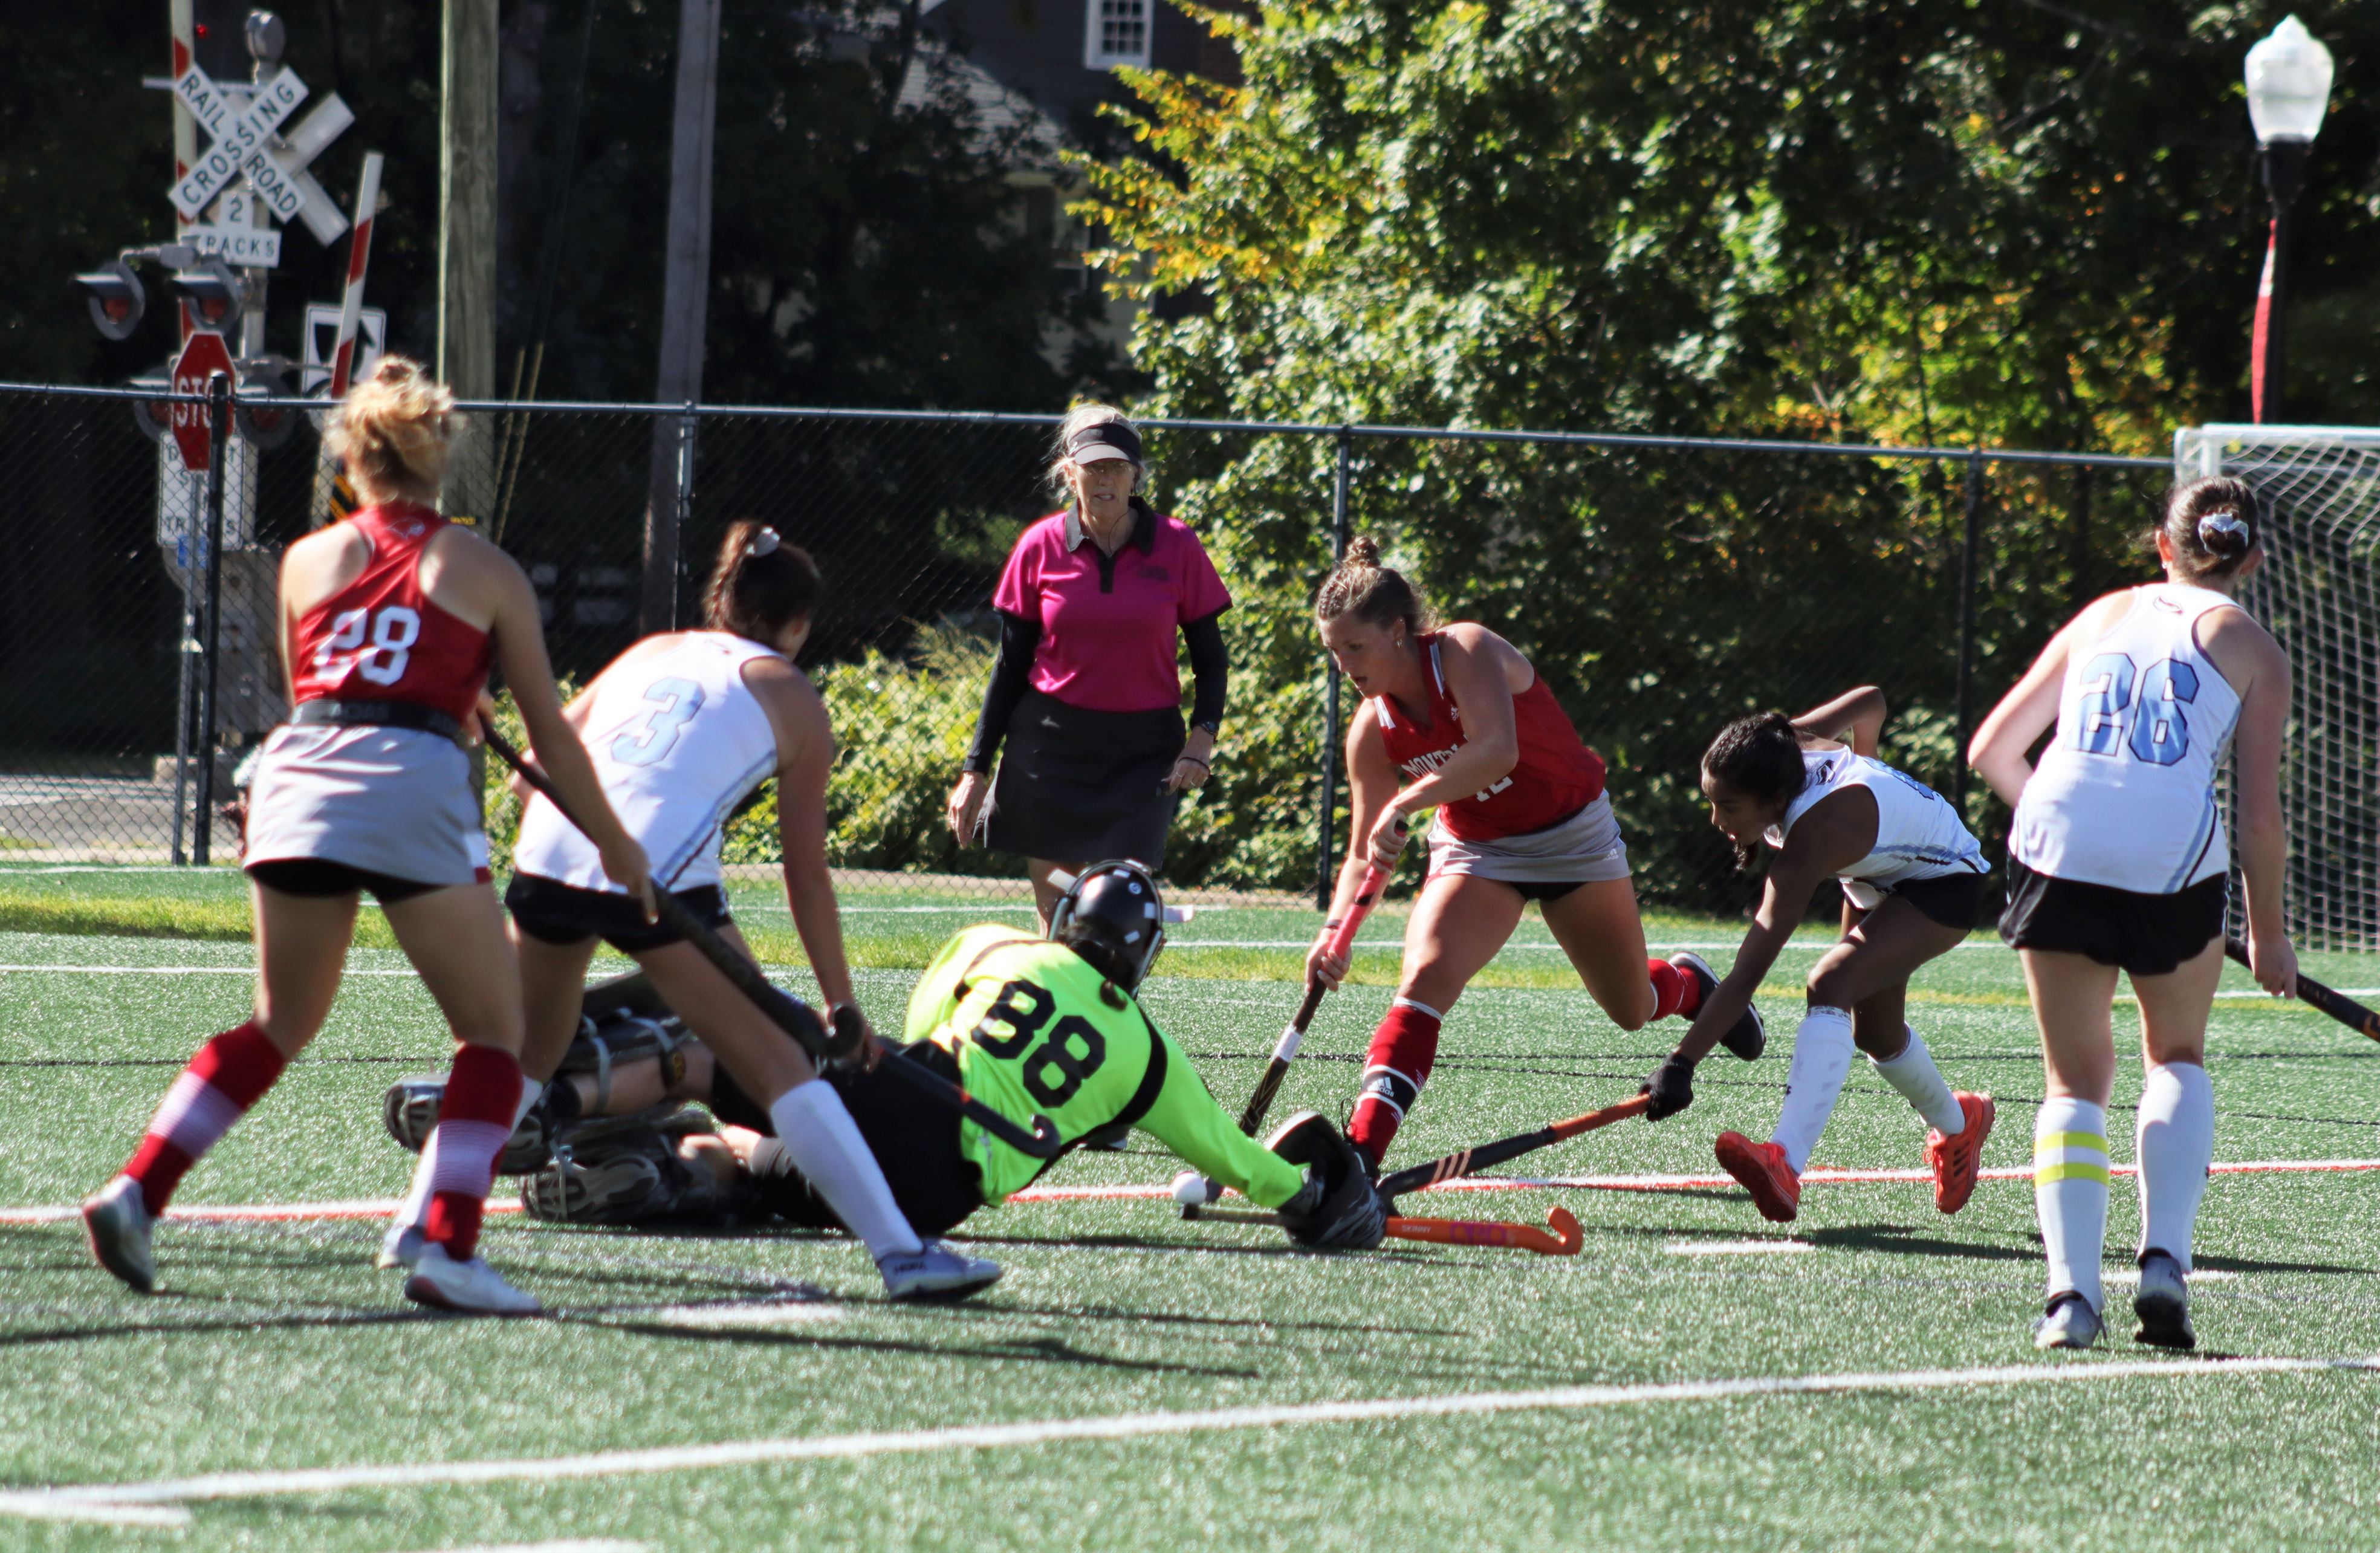 After a heartbreaking loss to Kean, the Red Hawks instantly bounced back and are on an upward trend once again. Trevor Giesberg | The Montclarion